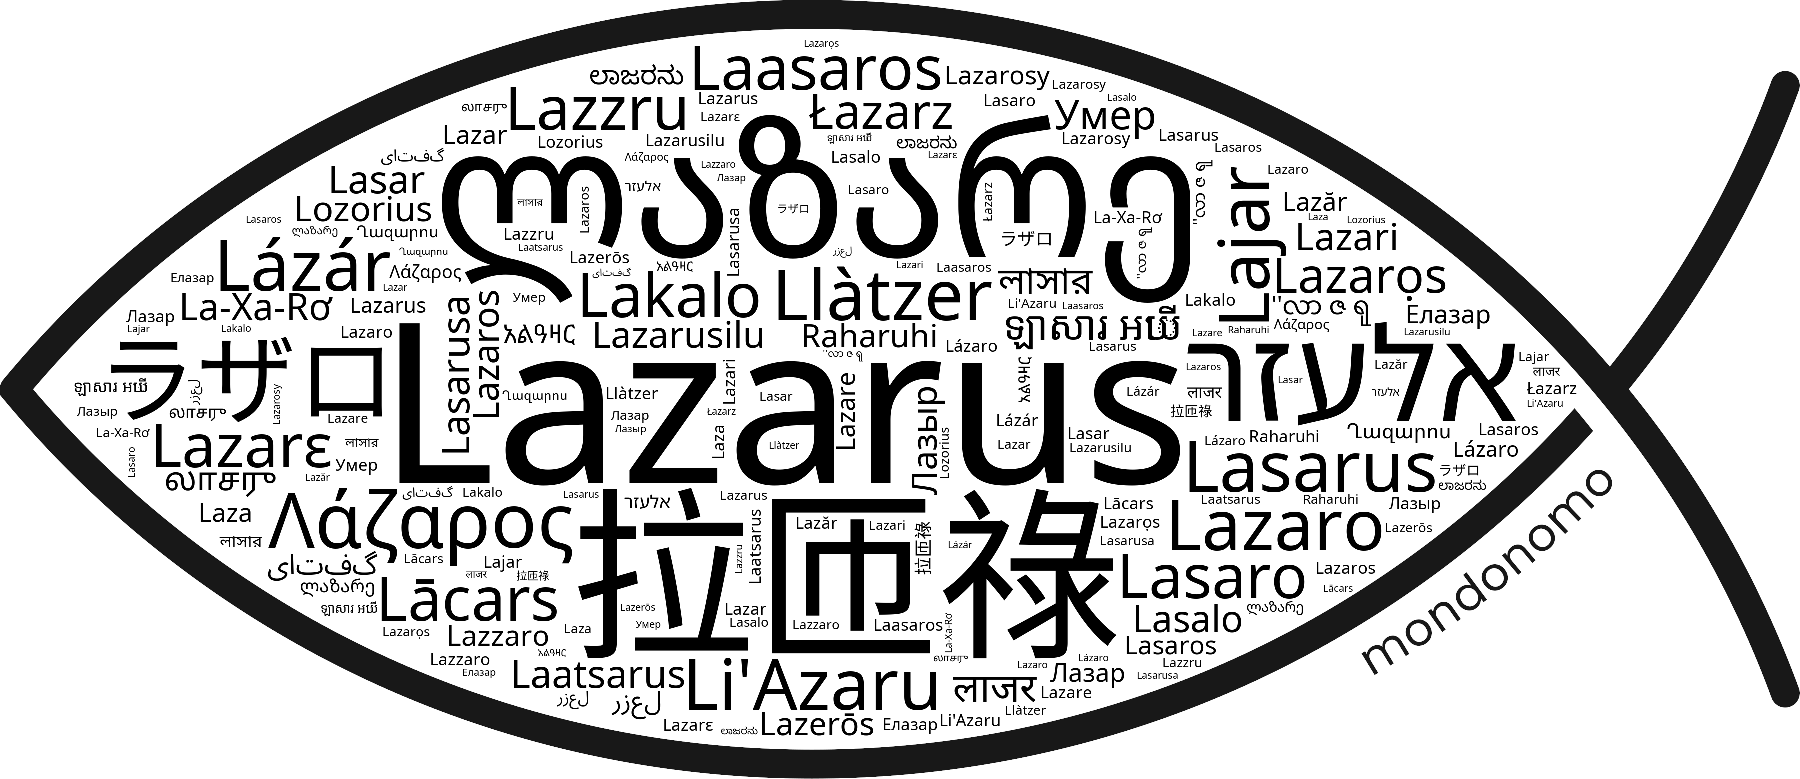 Name Lazarus in the world's Bibles